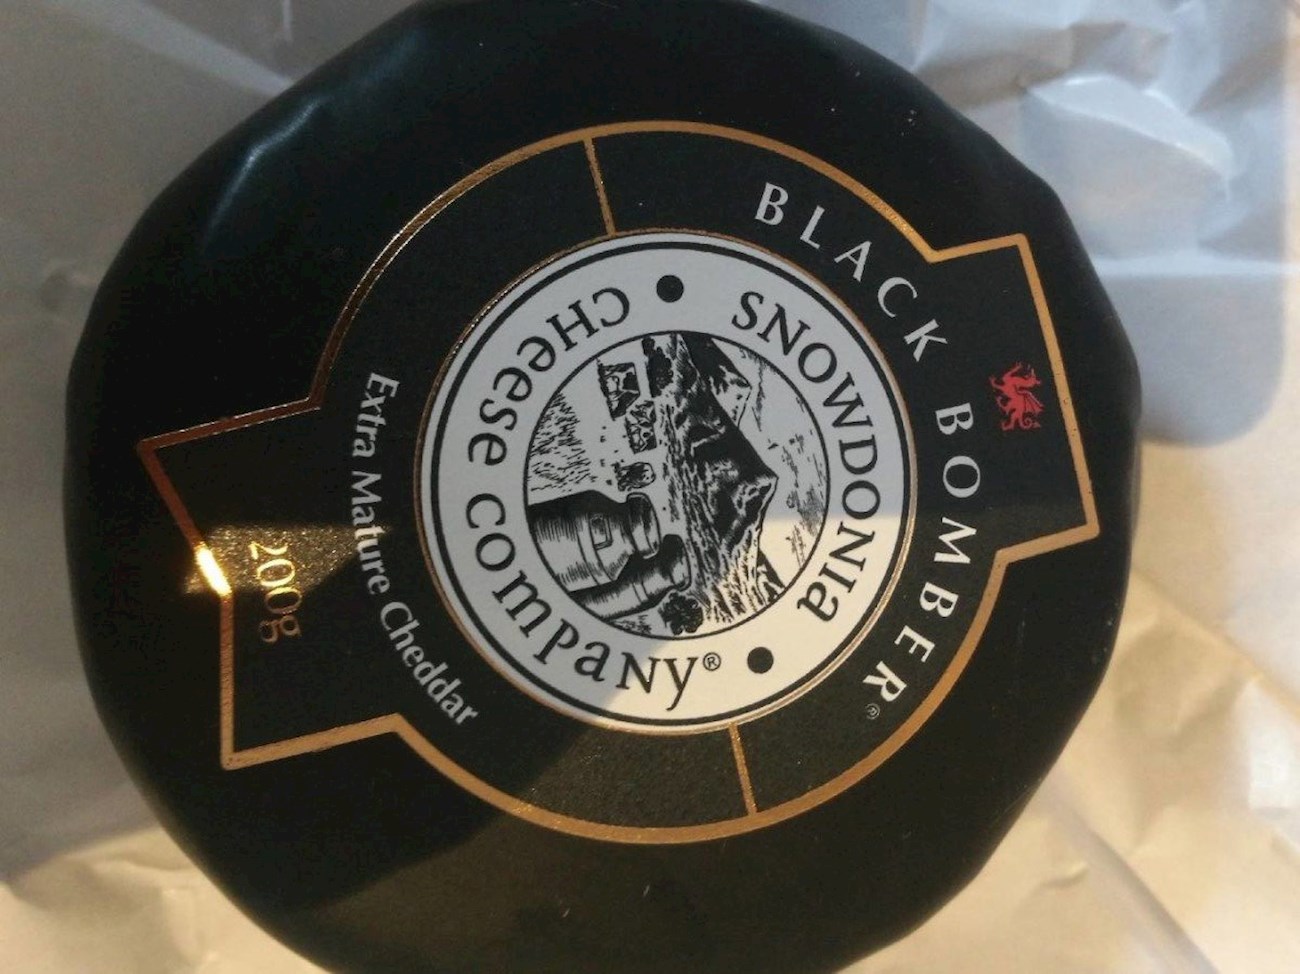 3 Best Rated Welsh Cheeses